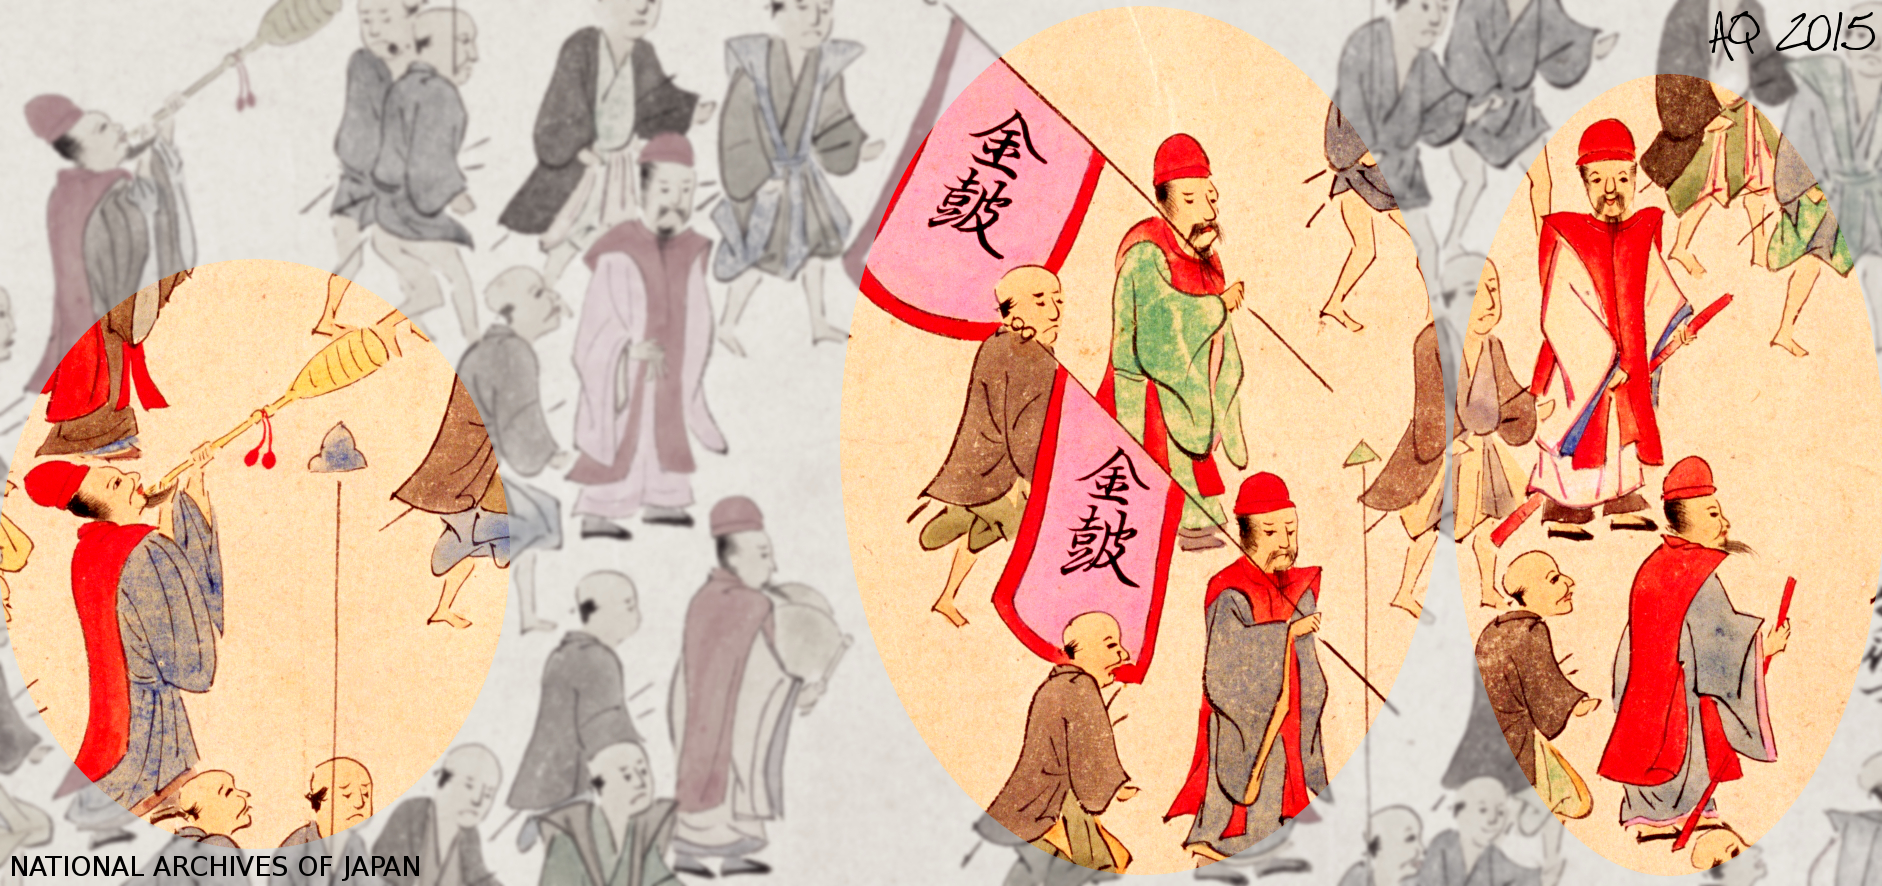 On the right side: red-lacquered Muchi as protrayed in a scroll of 1710. Source: Japan National Archives.